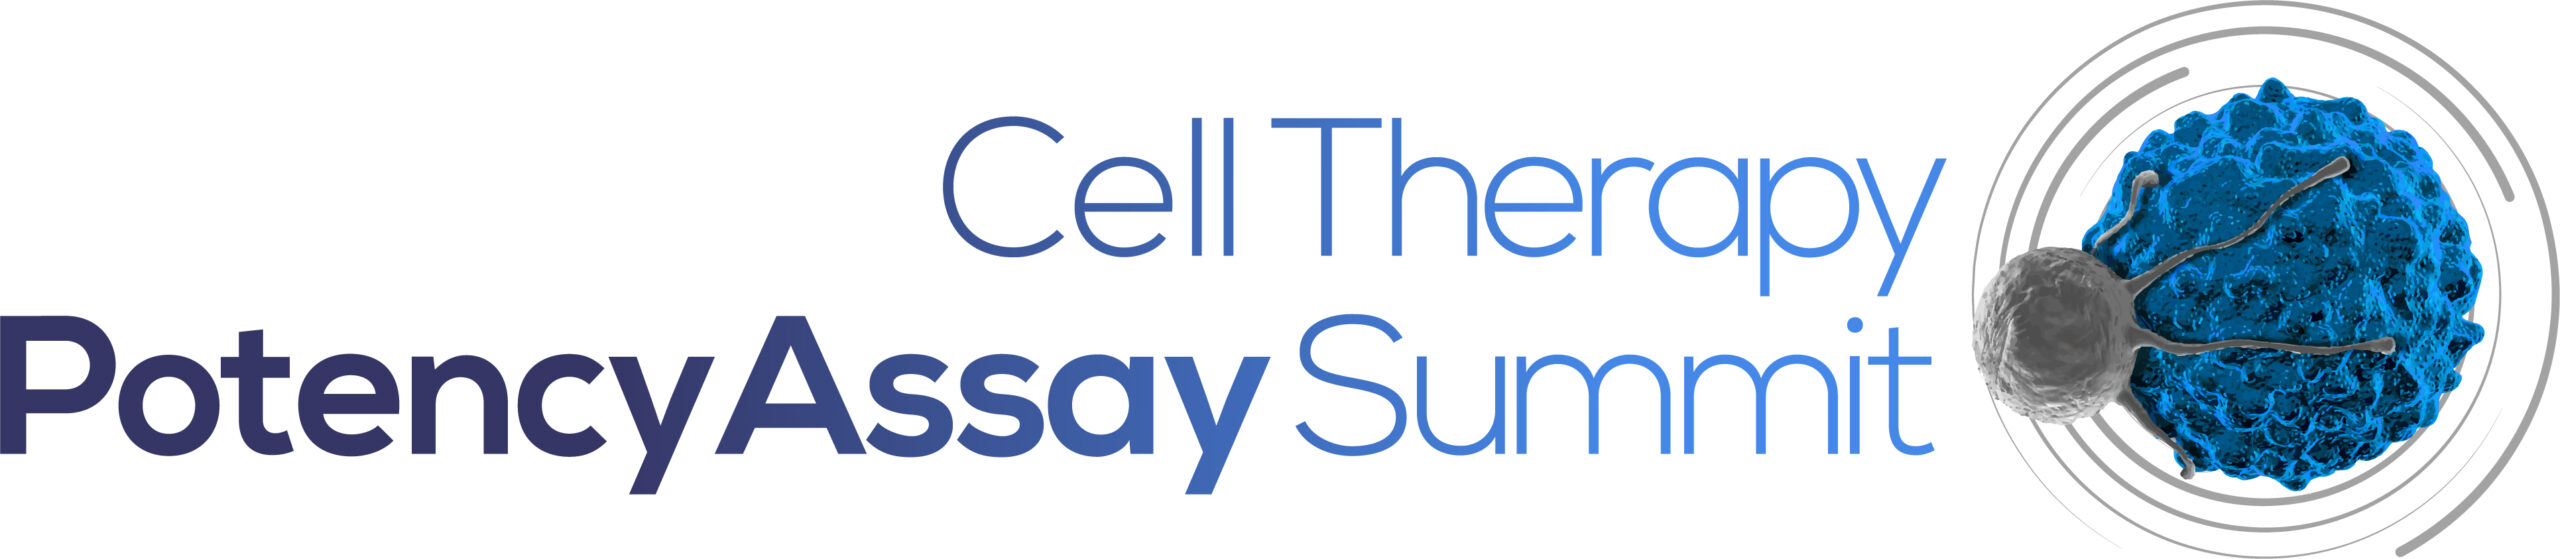 3rd Cell Therapy Potency Assay Summit Logo